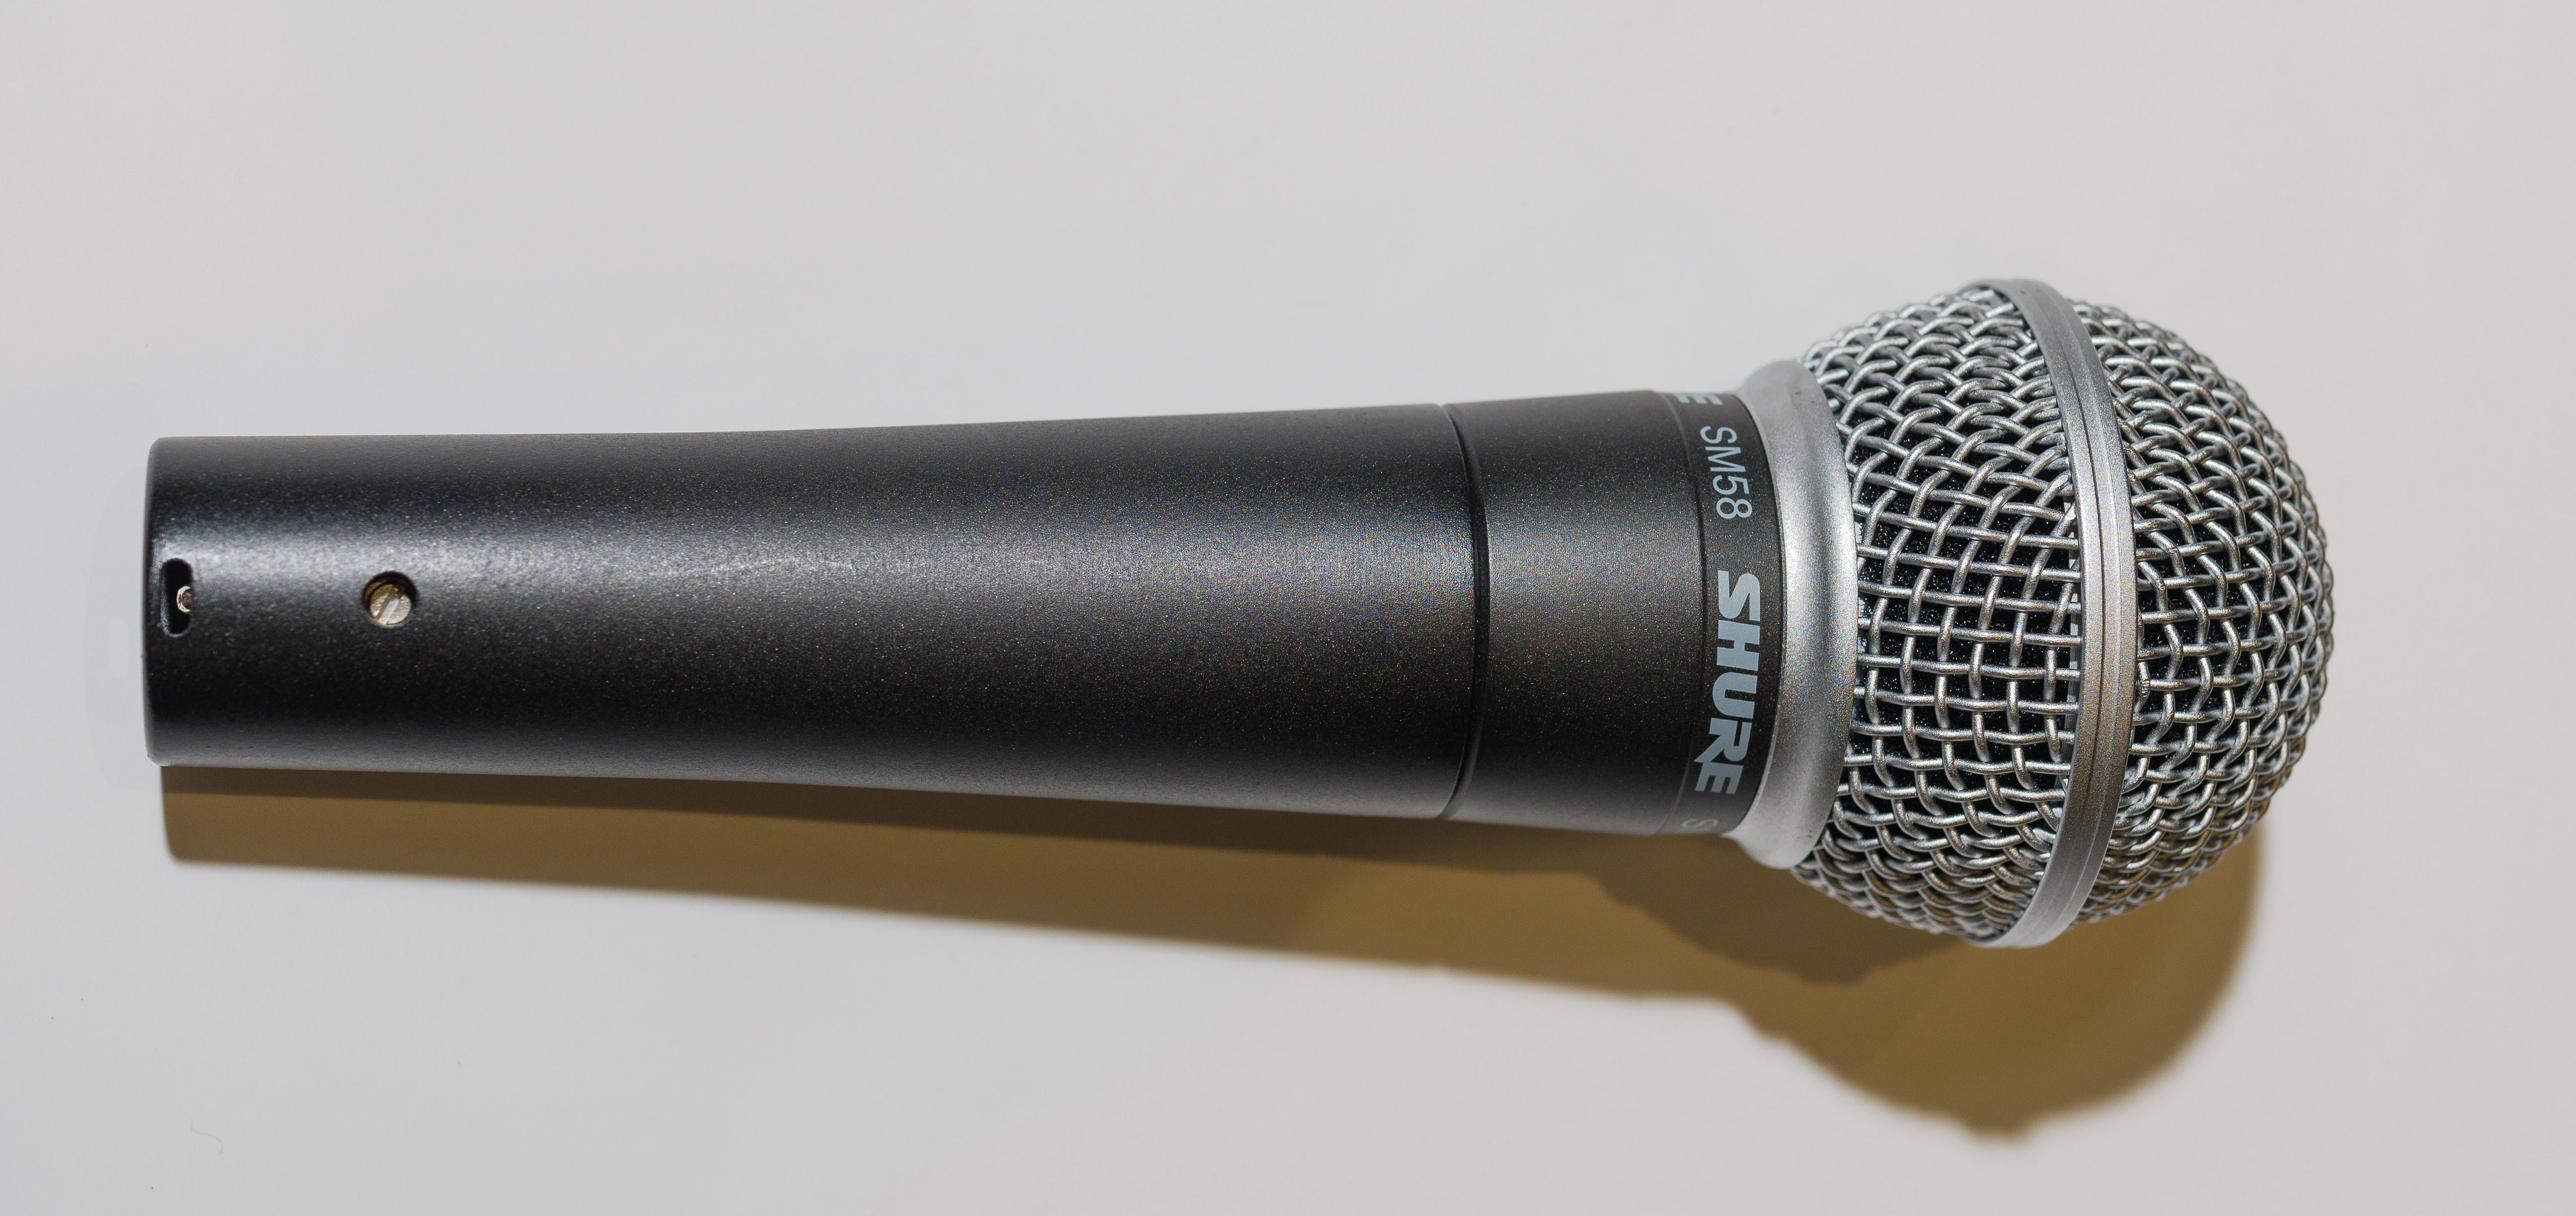 A microphone that is cylindrical at the bottom with a mesh ball on top.